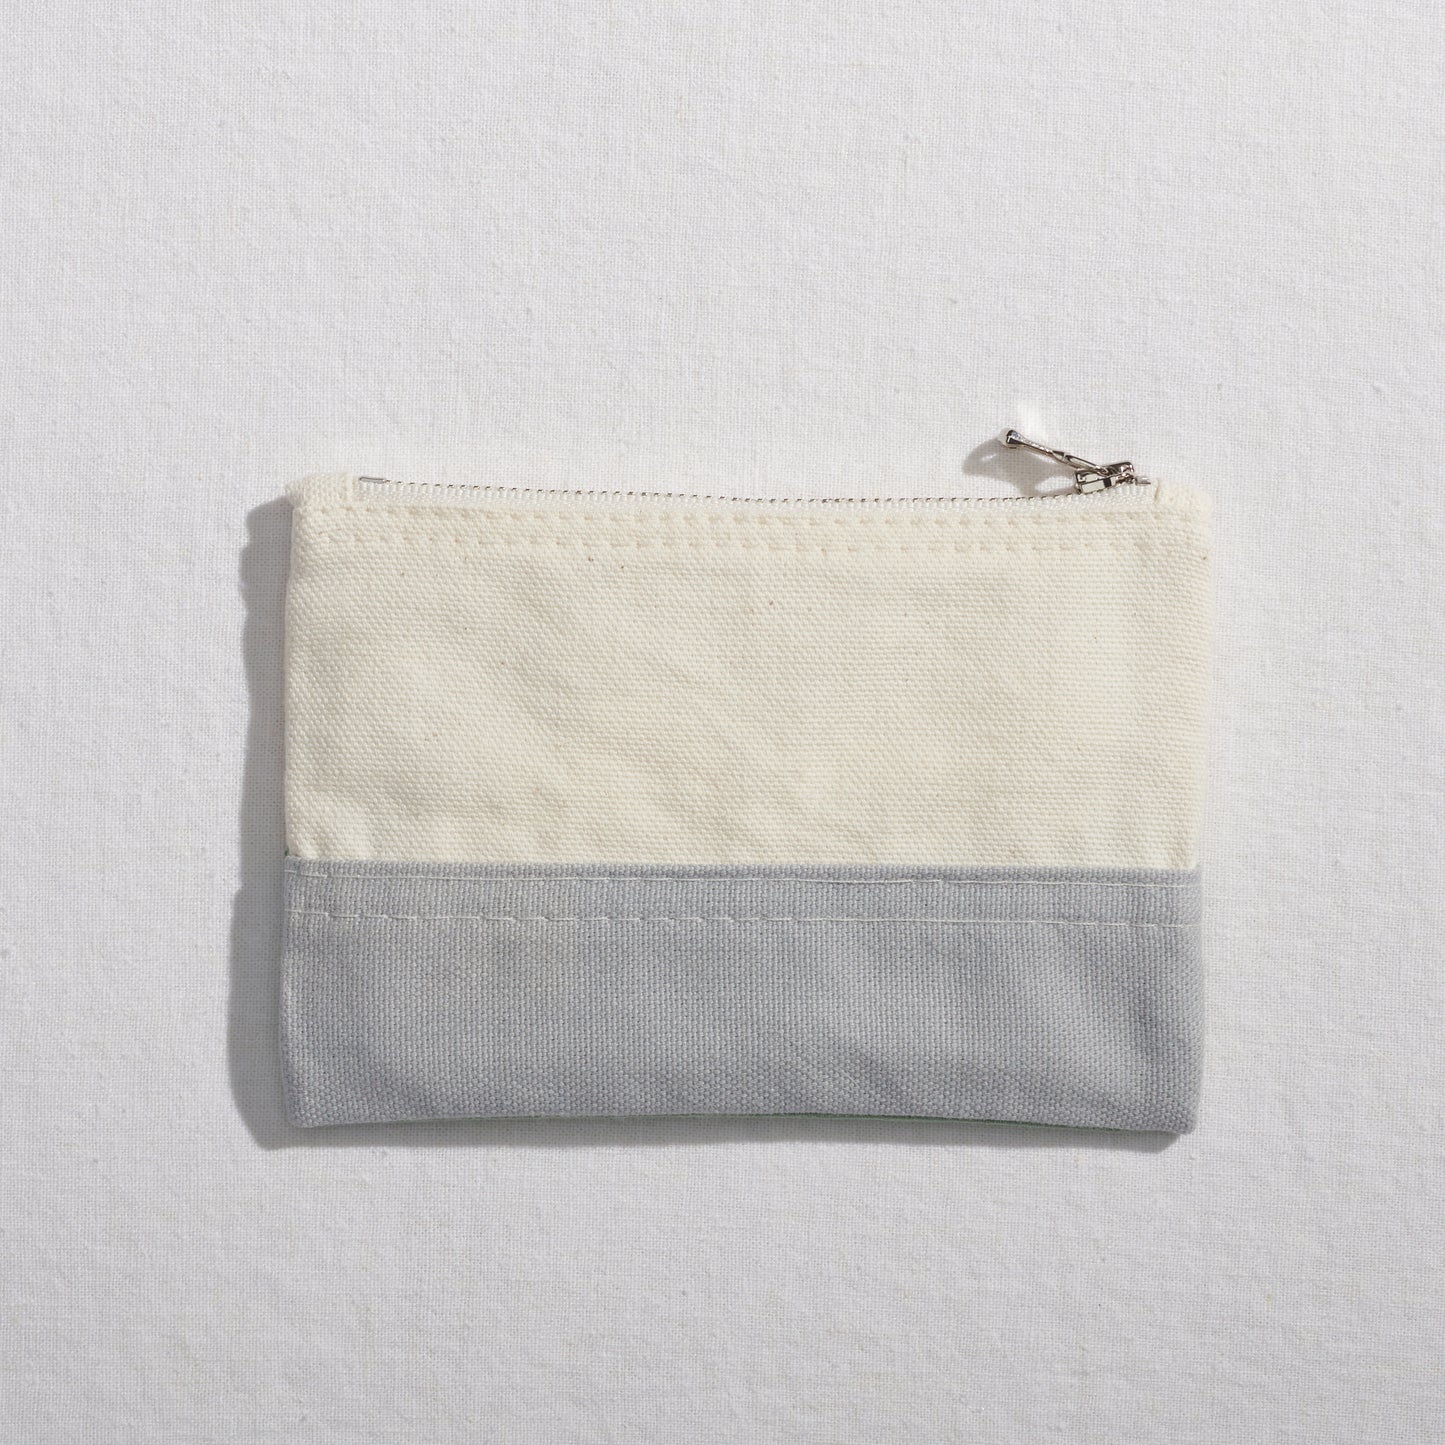 Re:Canvas "Threes" Pouch in Driftwood